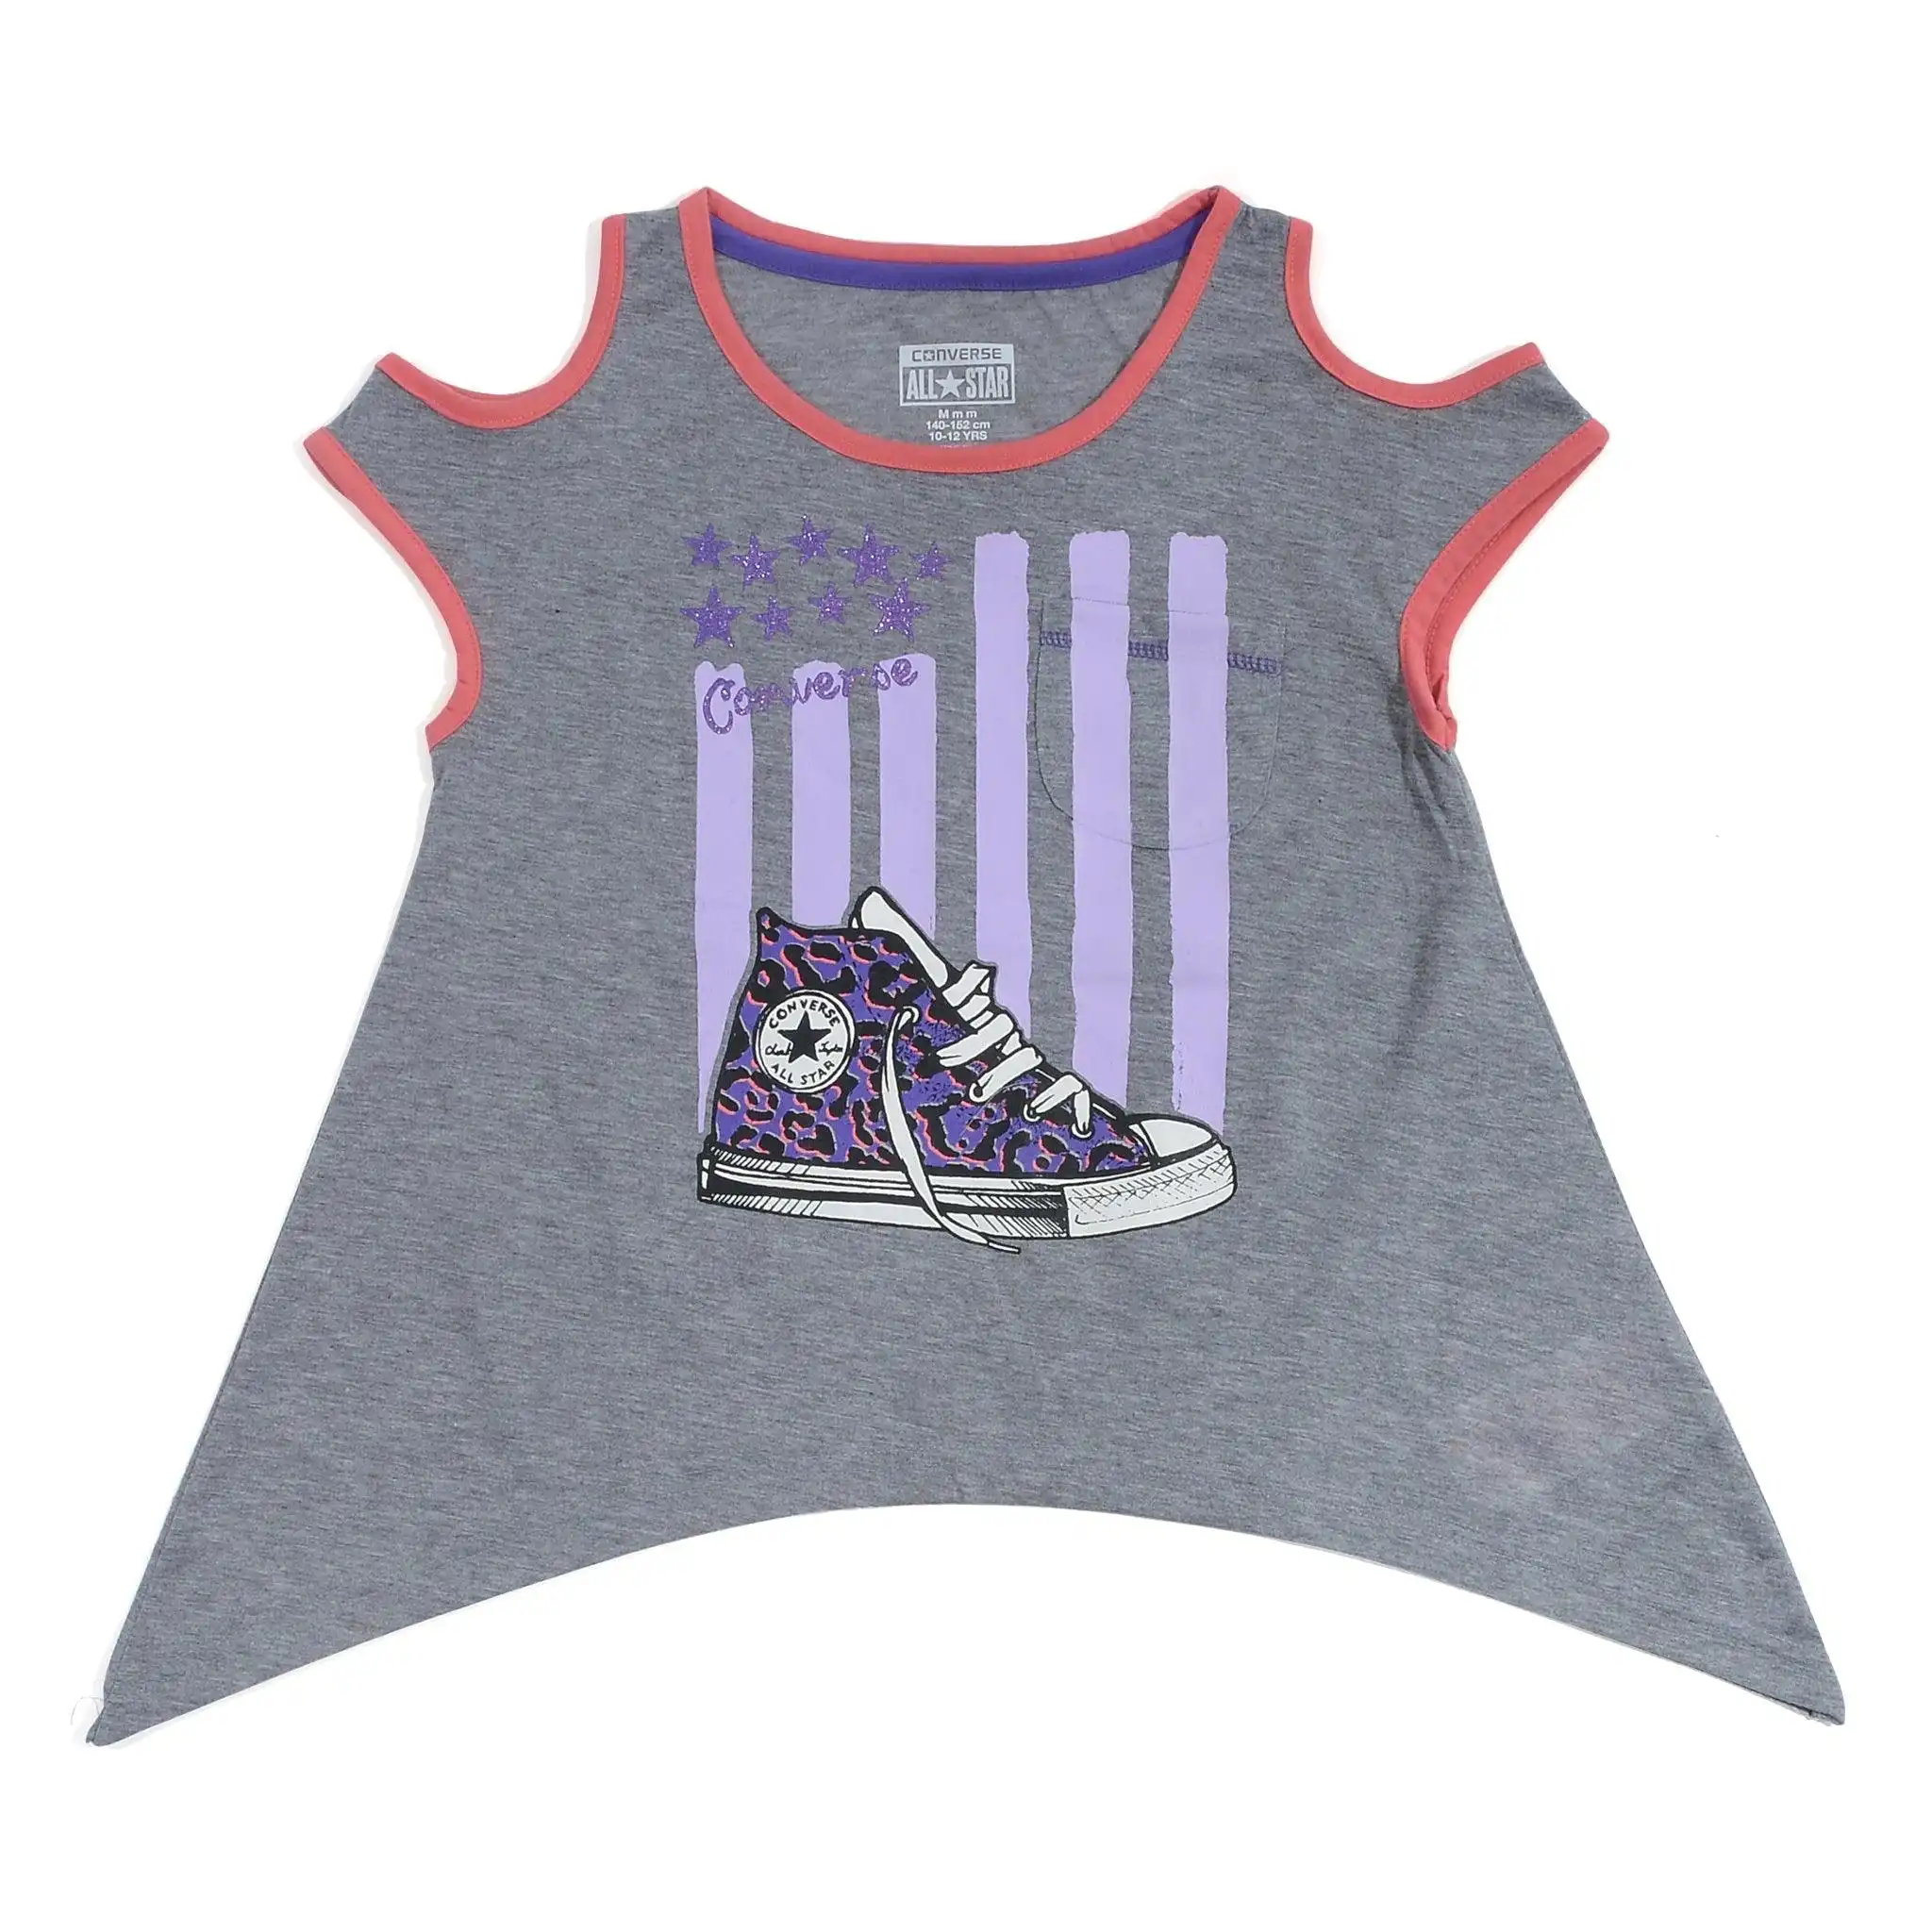 Converse Girl's Grey With Purple Print Cut Out T-Shirt with Shoe Design